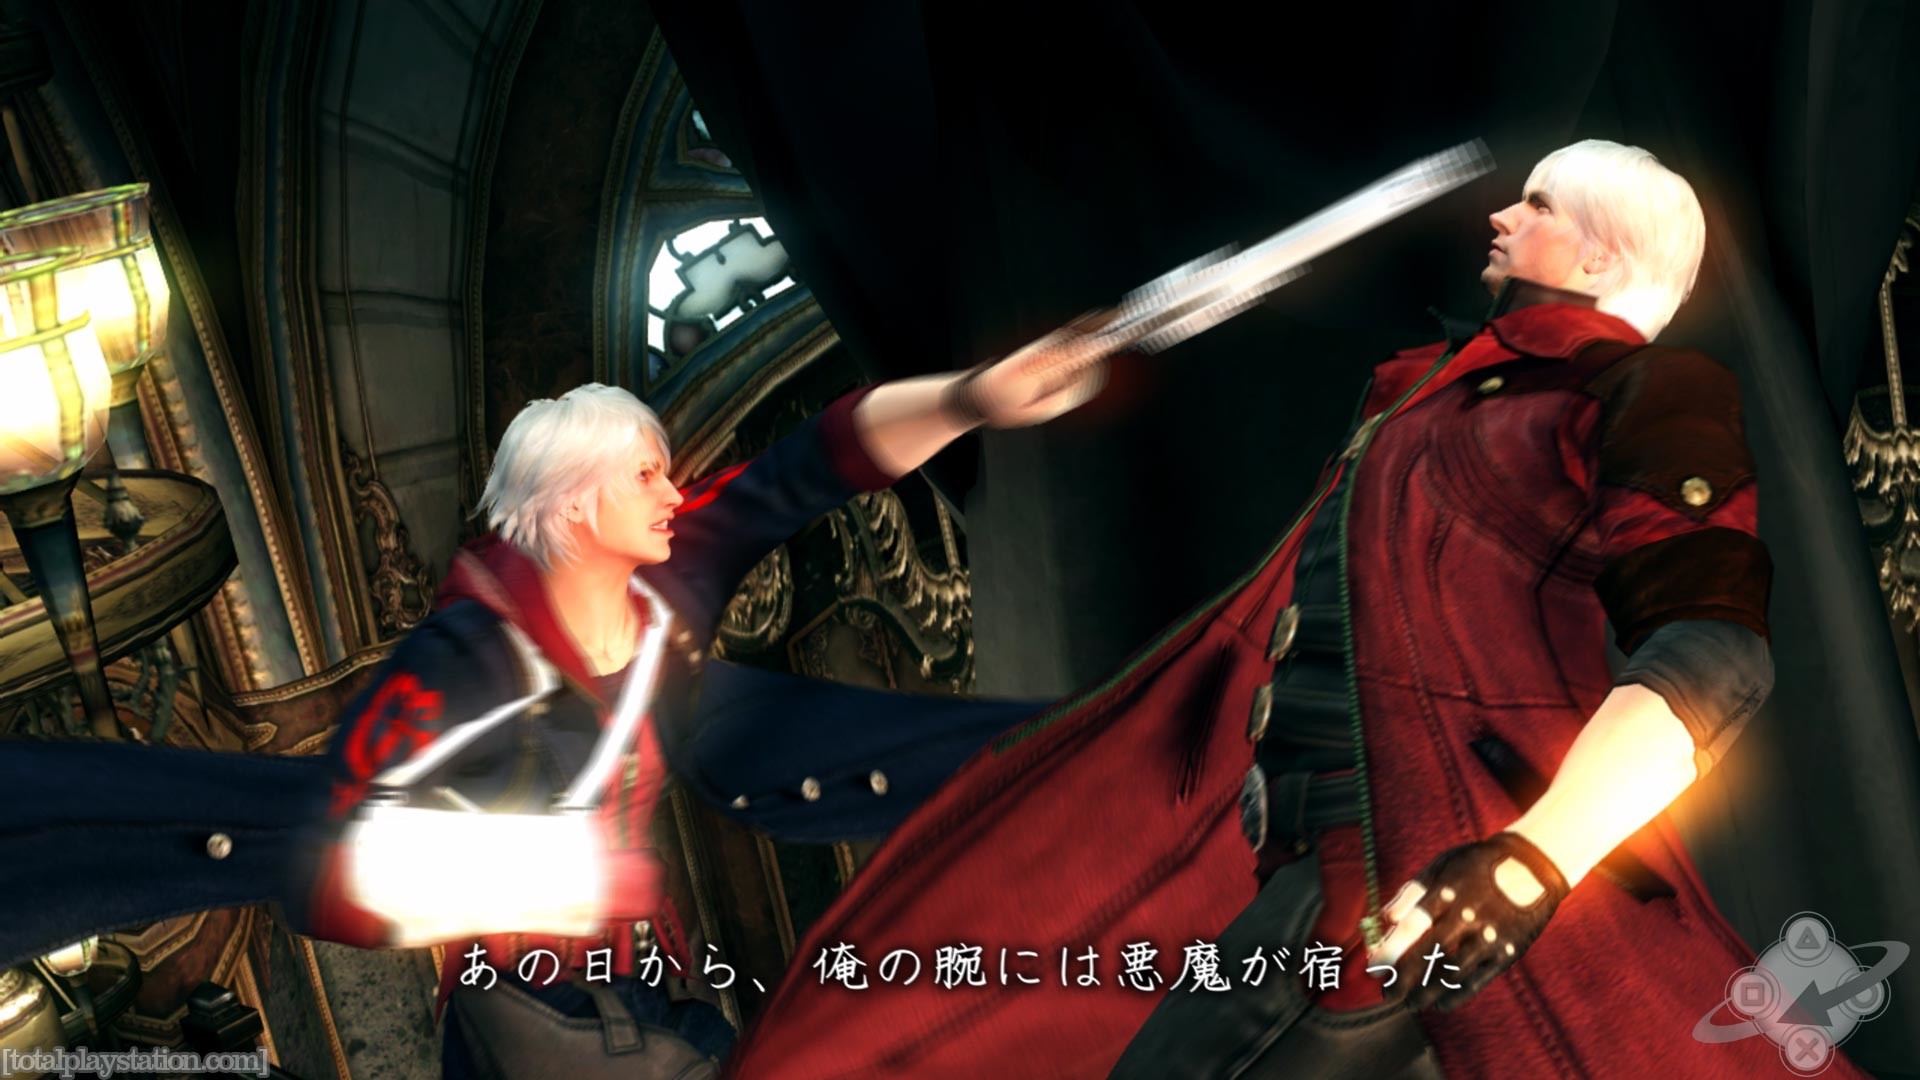 1920x1080 View Fullsize Devil May Cry Image